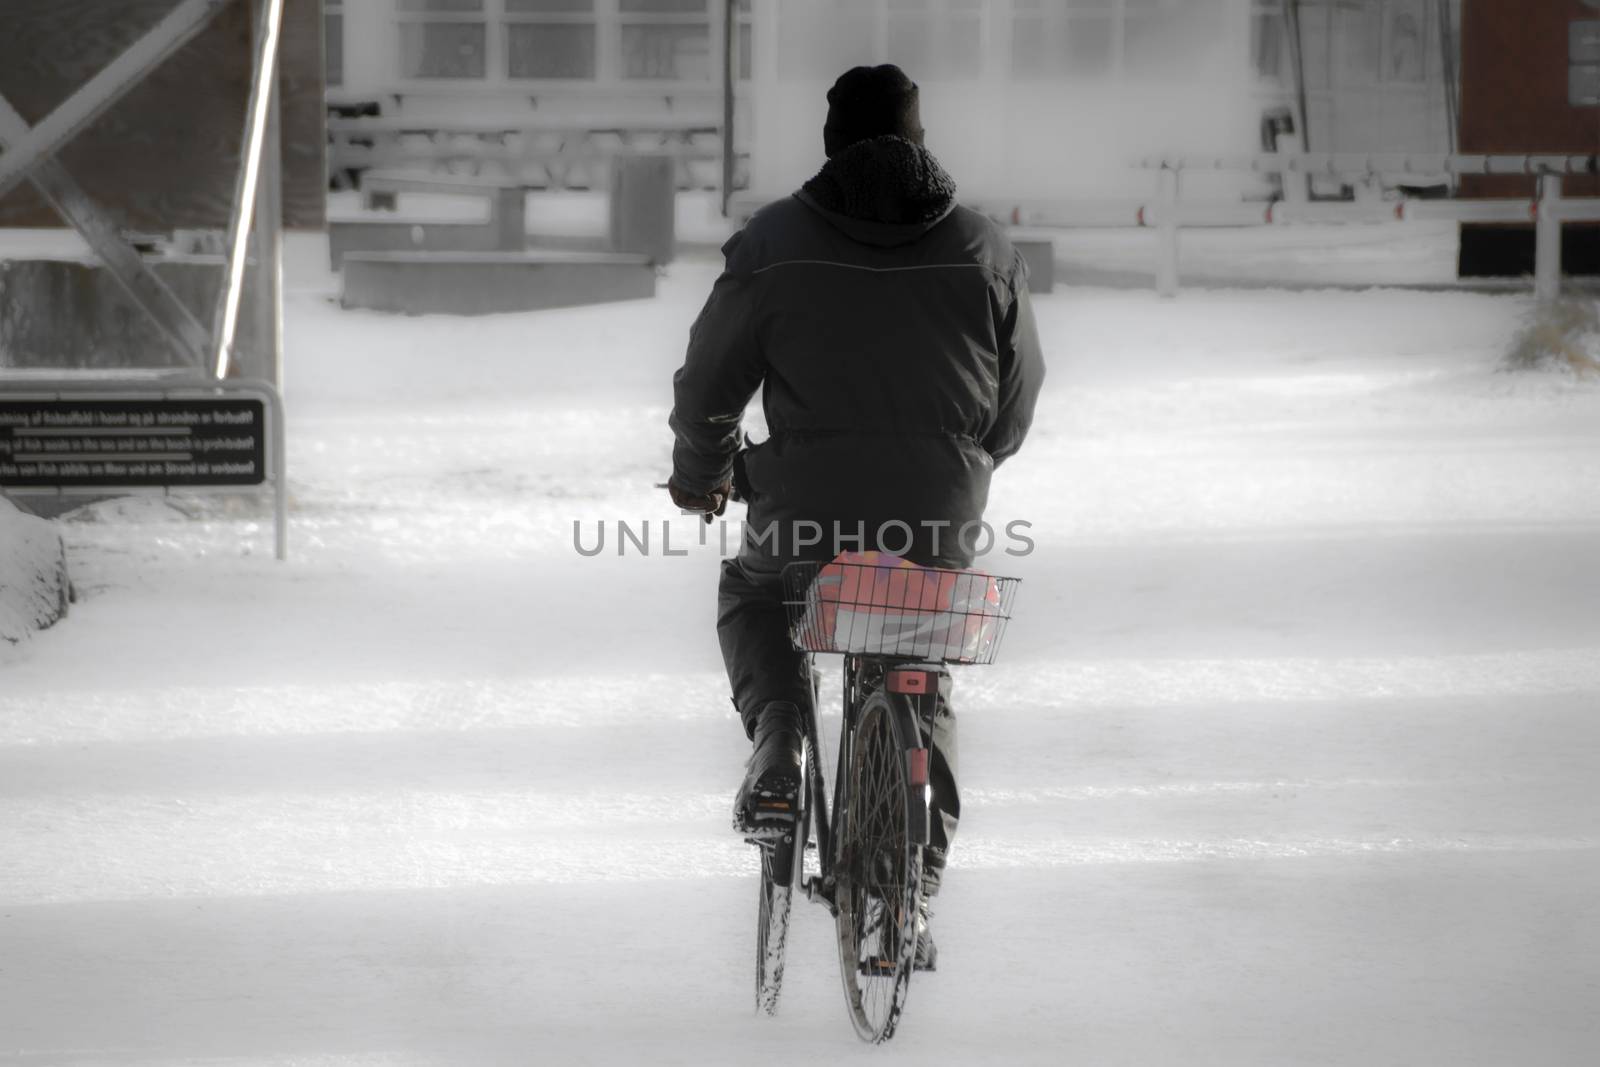 Cyclists in winter by Fr@nk